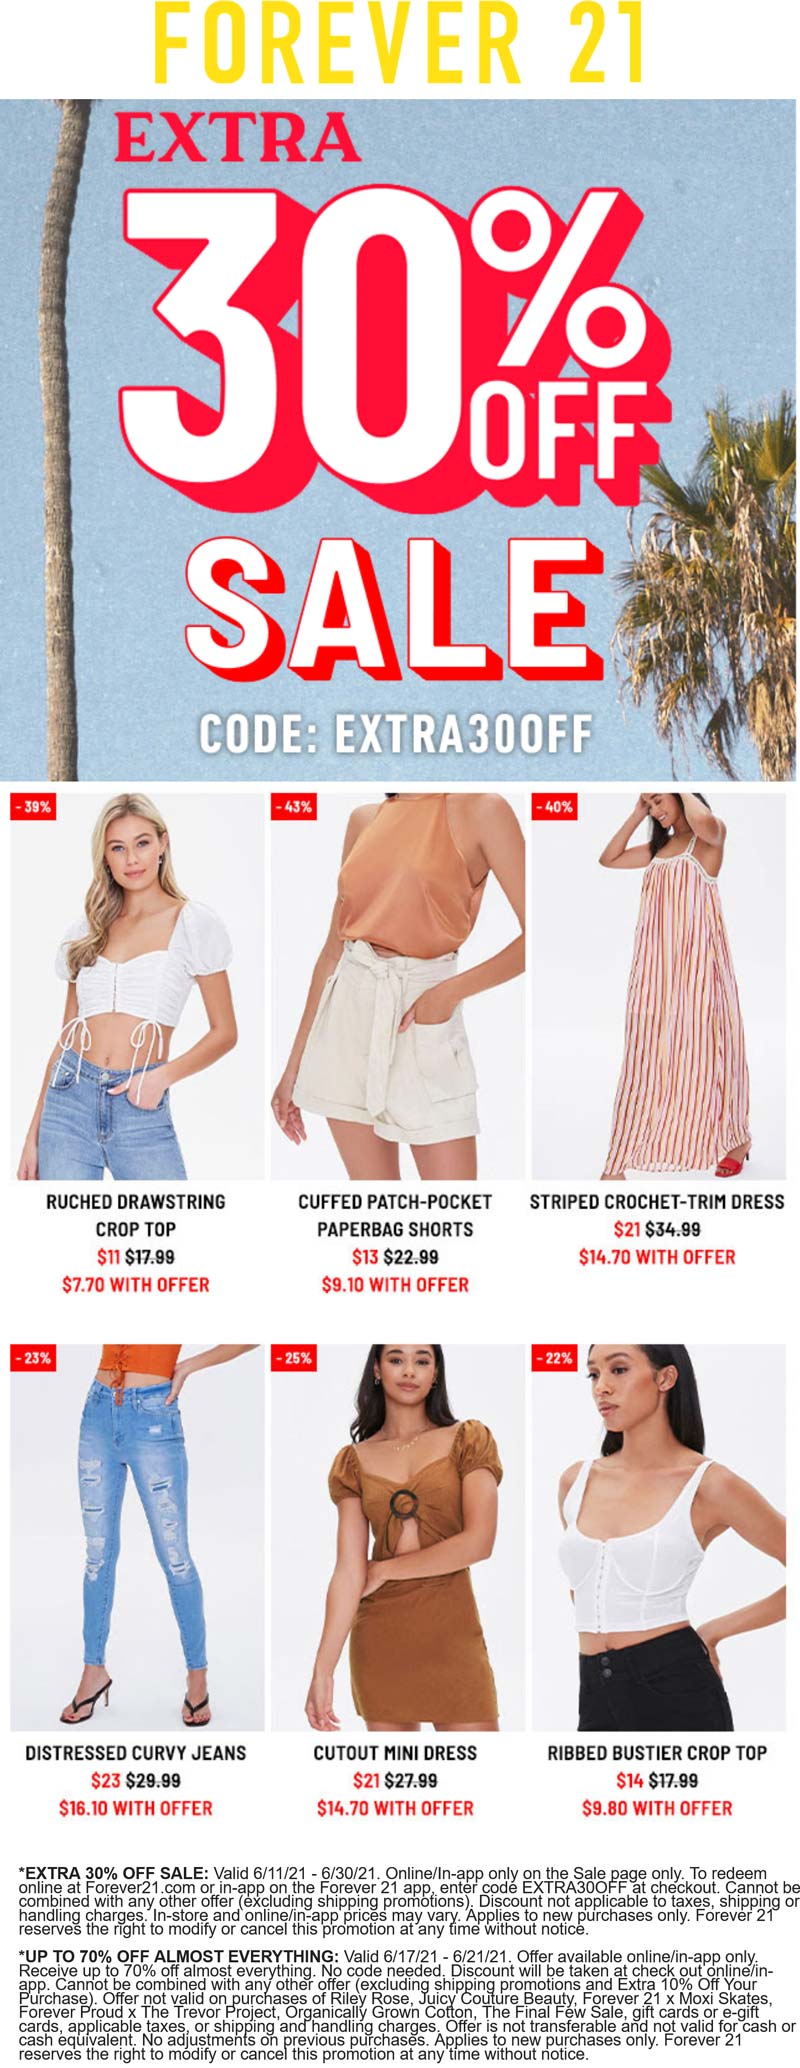 Forever 21 stores Coupon  Extra 30% off sale items online today at Forever 21 via promo code EXTRA30OFF #forever21 